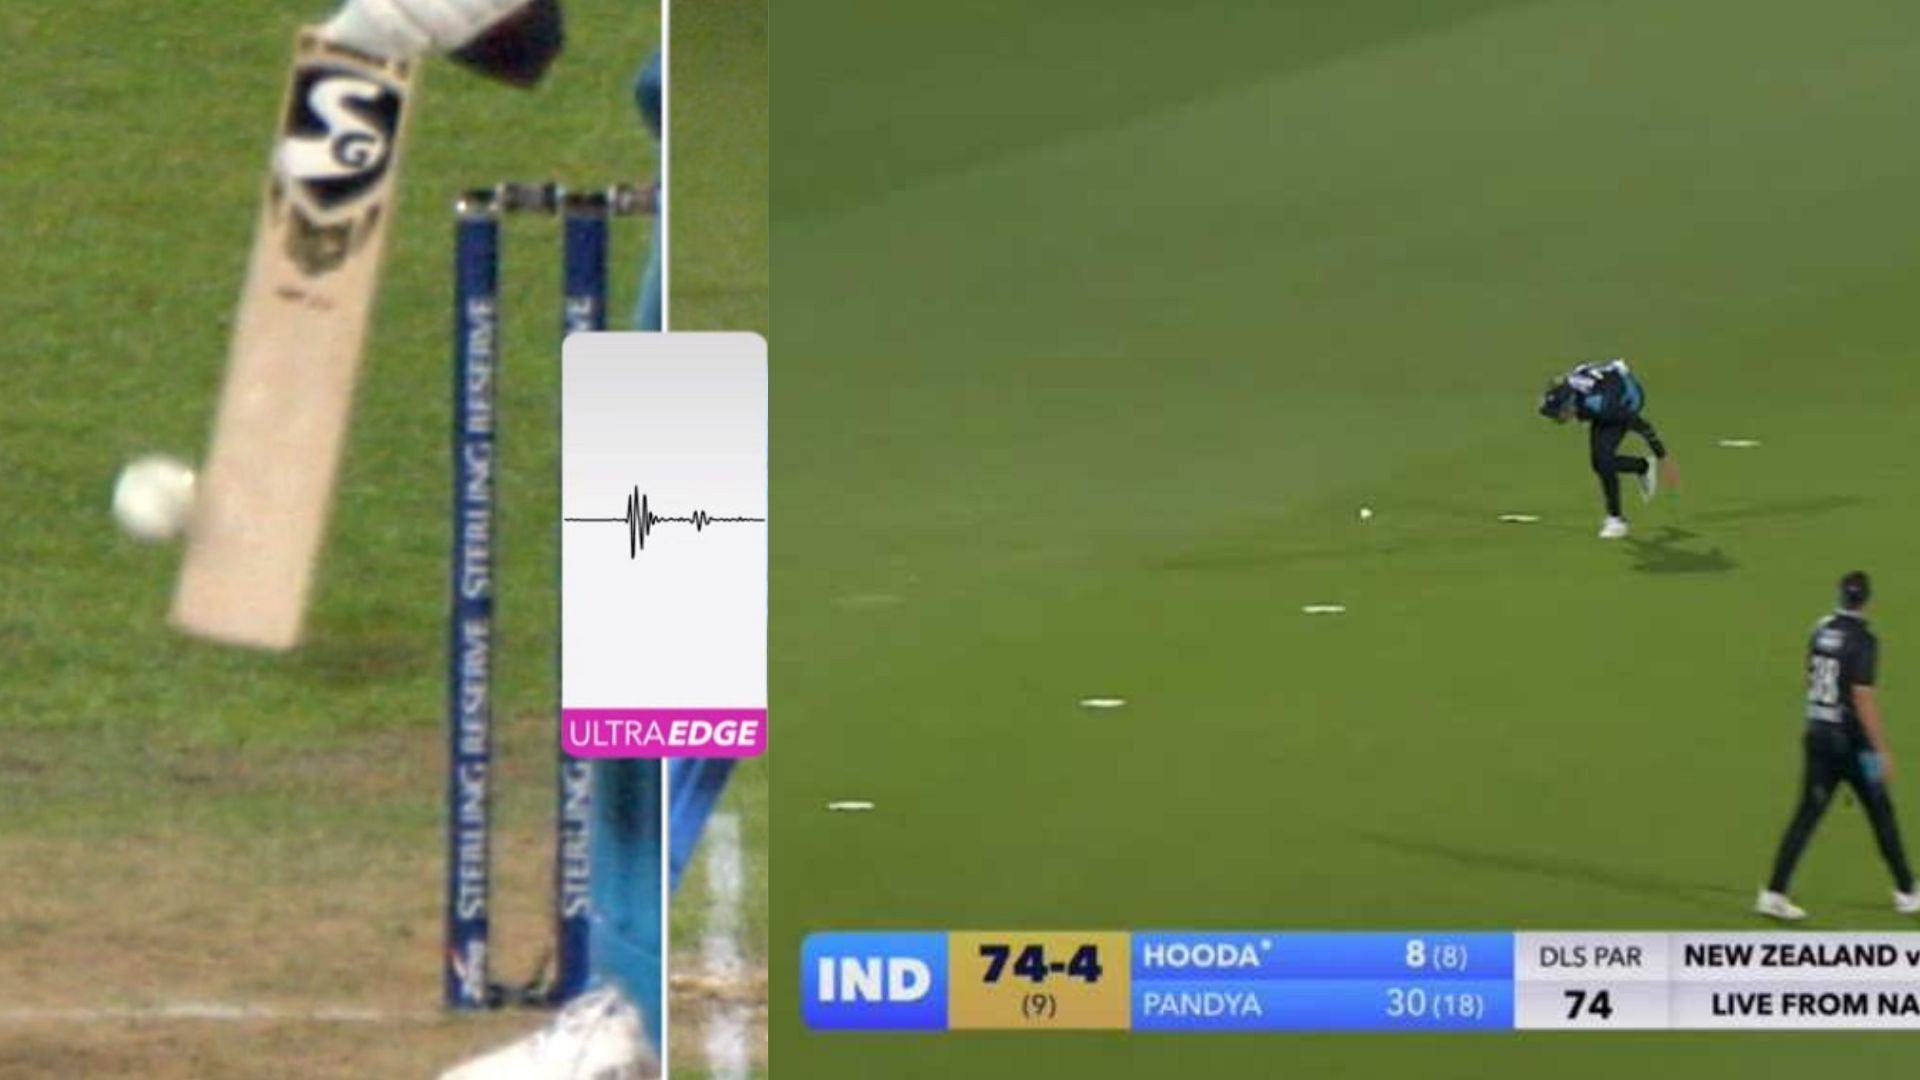 Some moments from the 3rd T20I that became talking points. (P.C.:Prime Video)